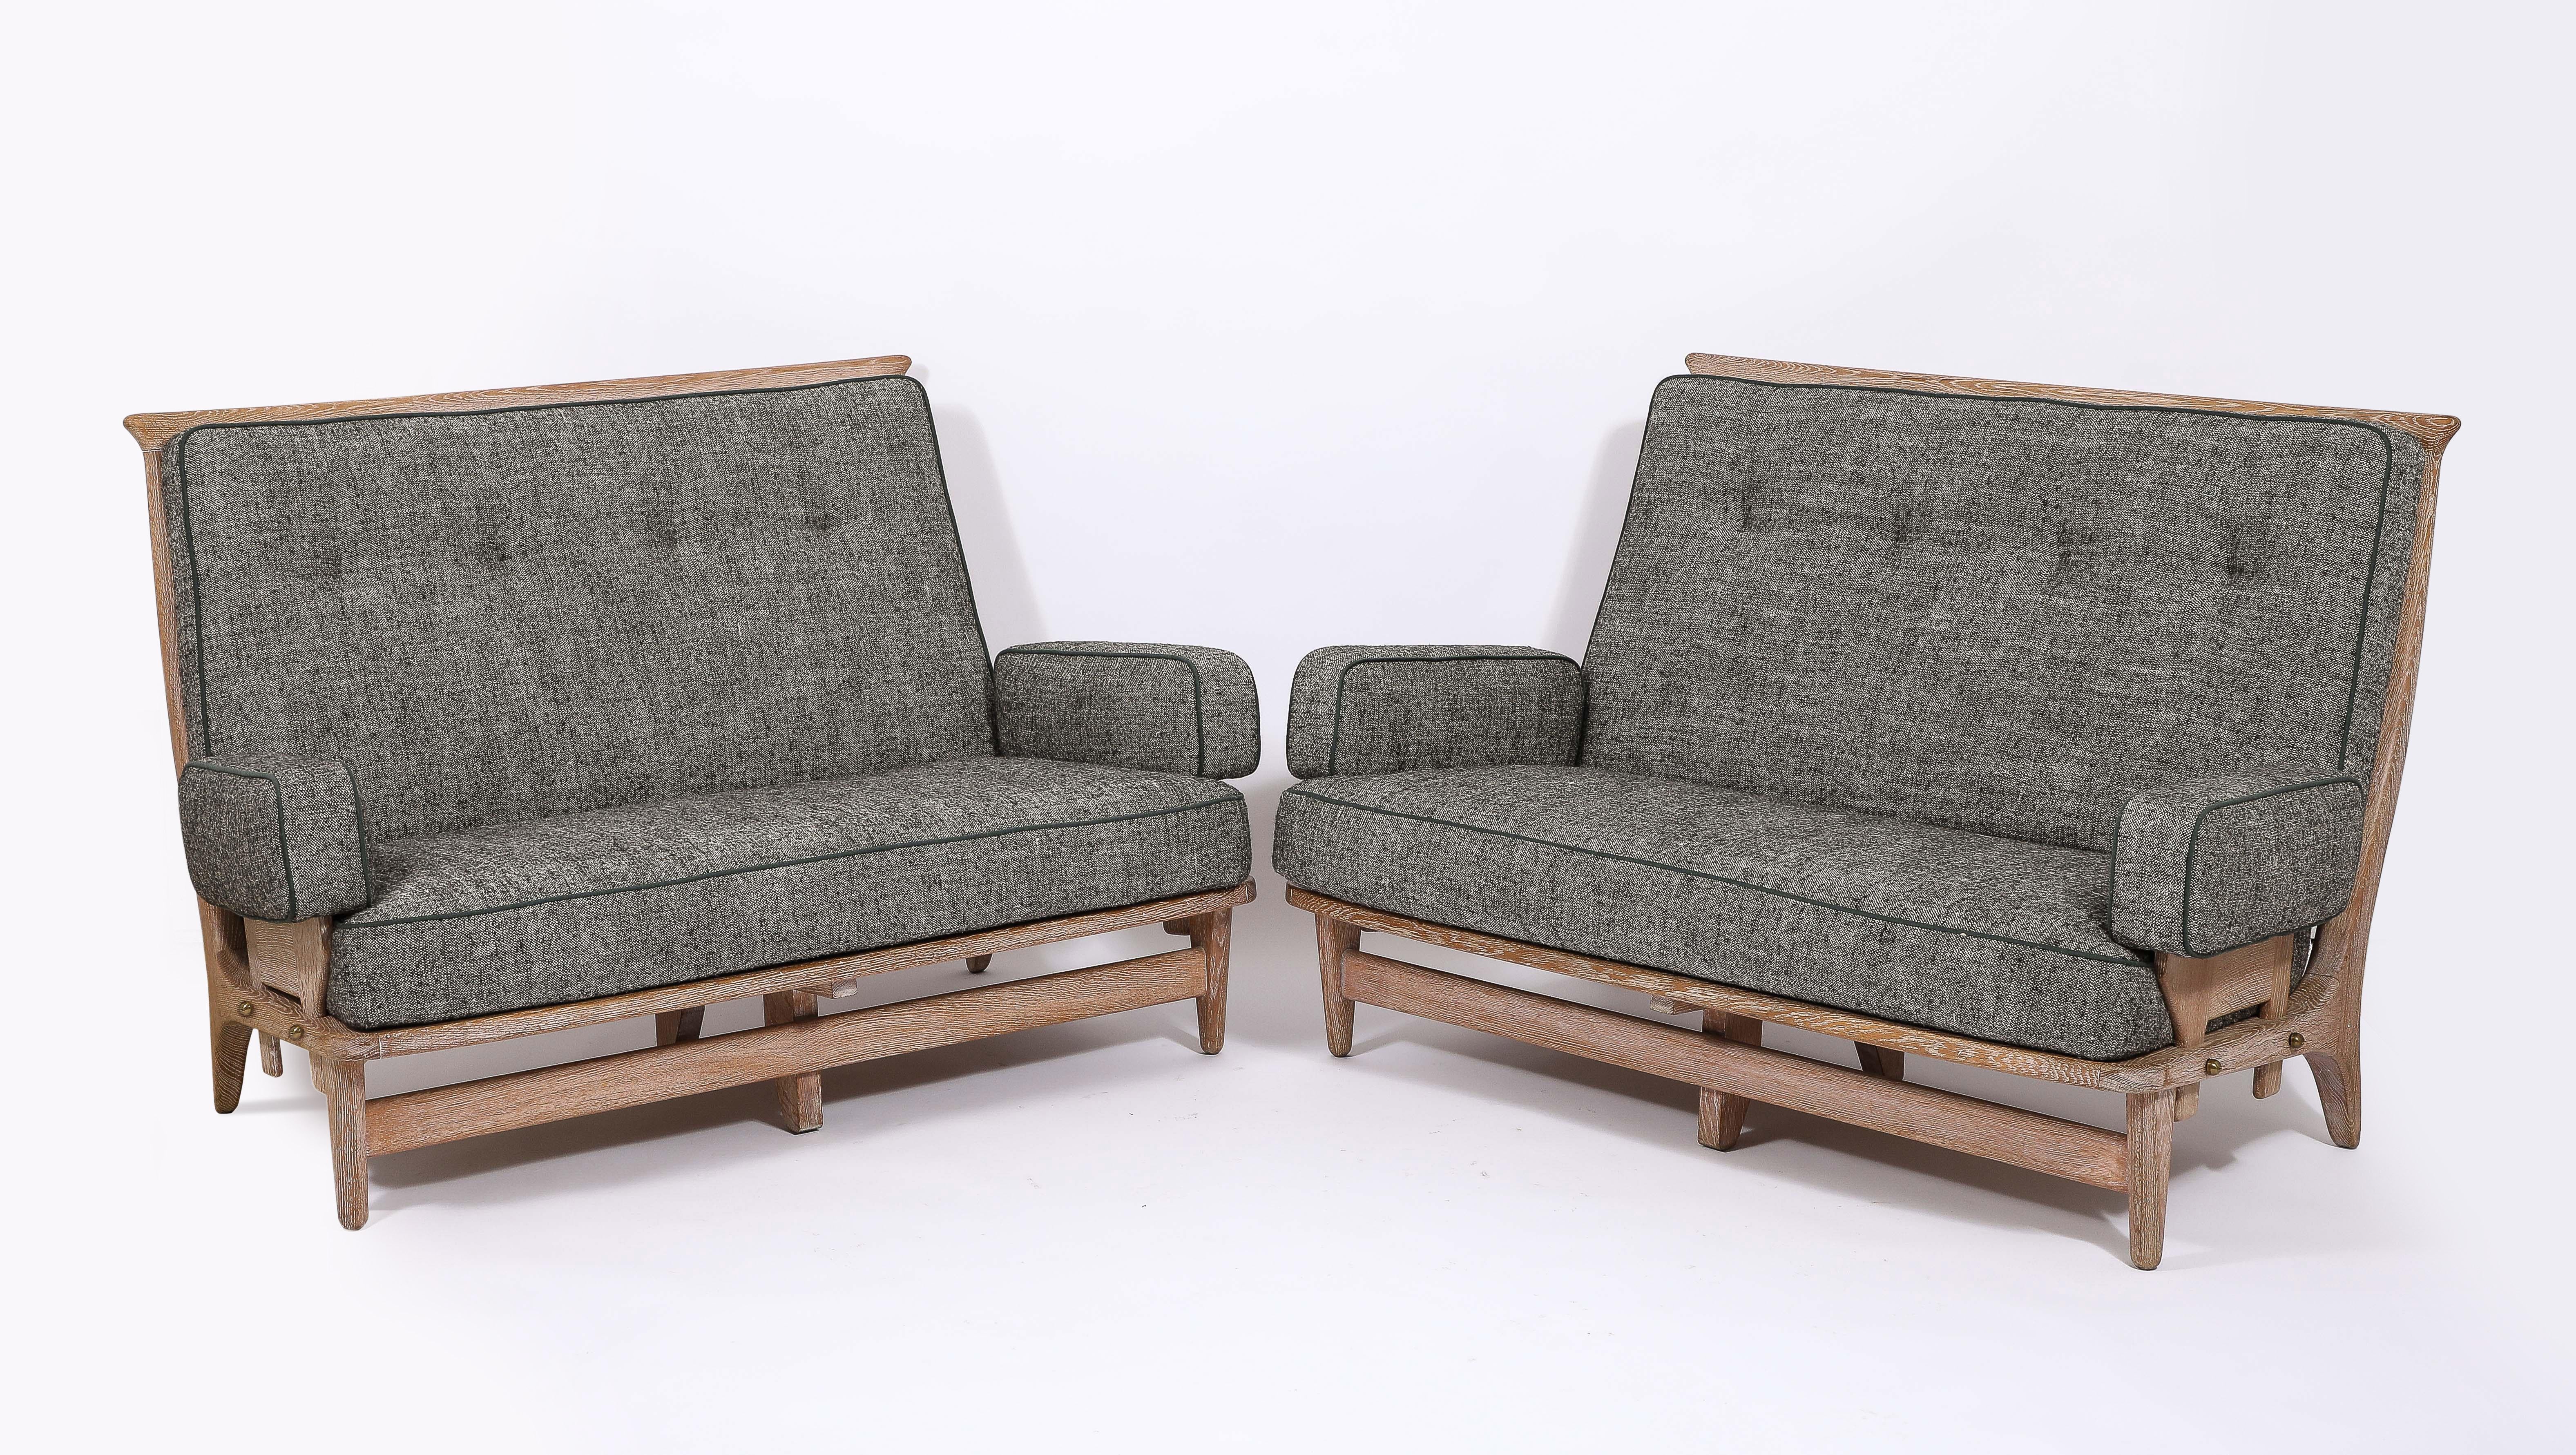 Guillerme & Chambron Settees in Oak, France 1960's For Sale 4